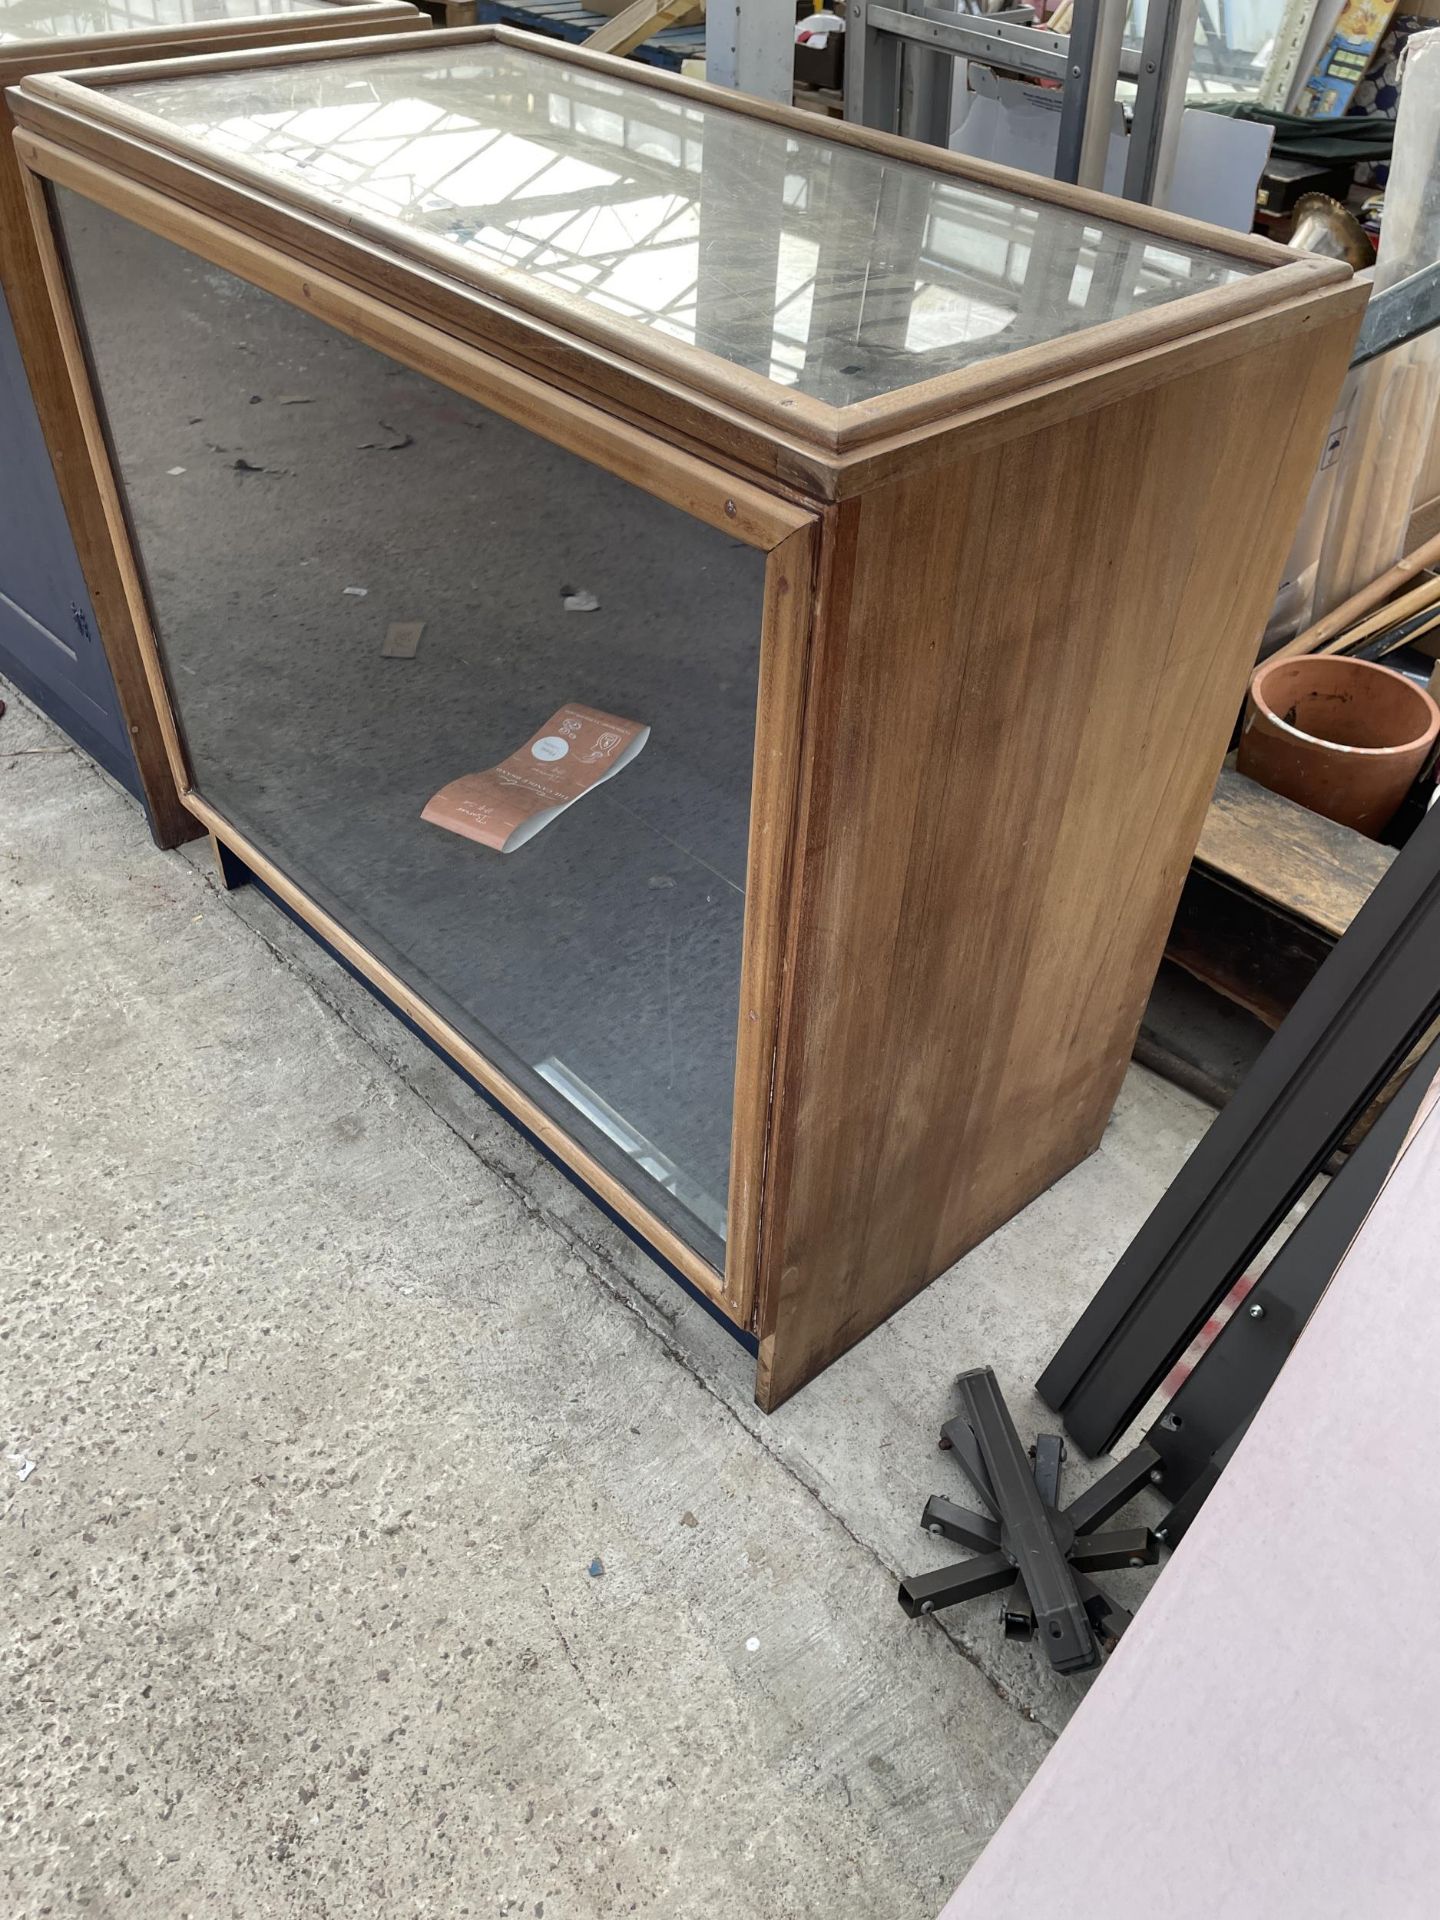 A VINTAGE GLASS FRONTED SHOP DISPLAY UNIT - Image 2 of 3